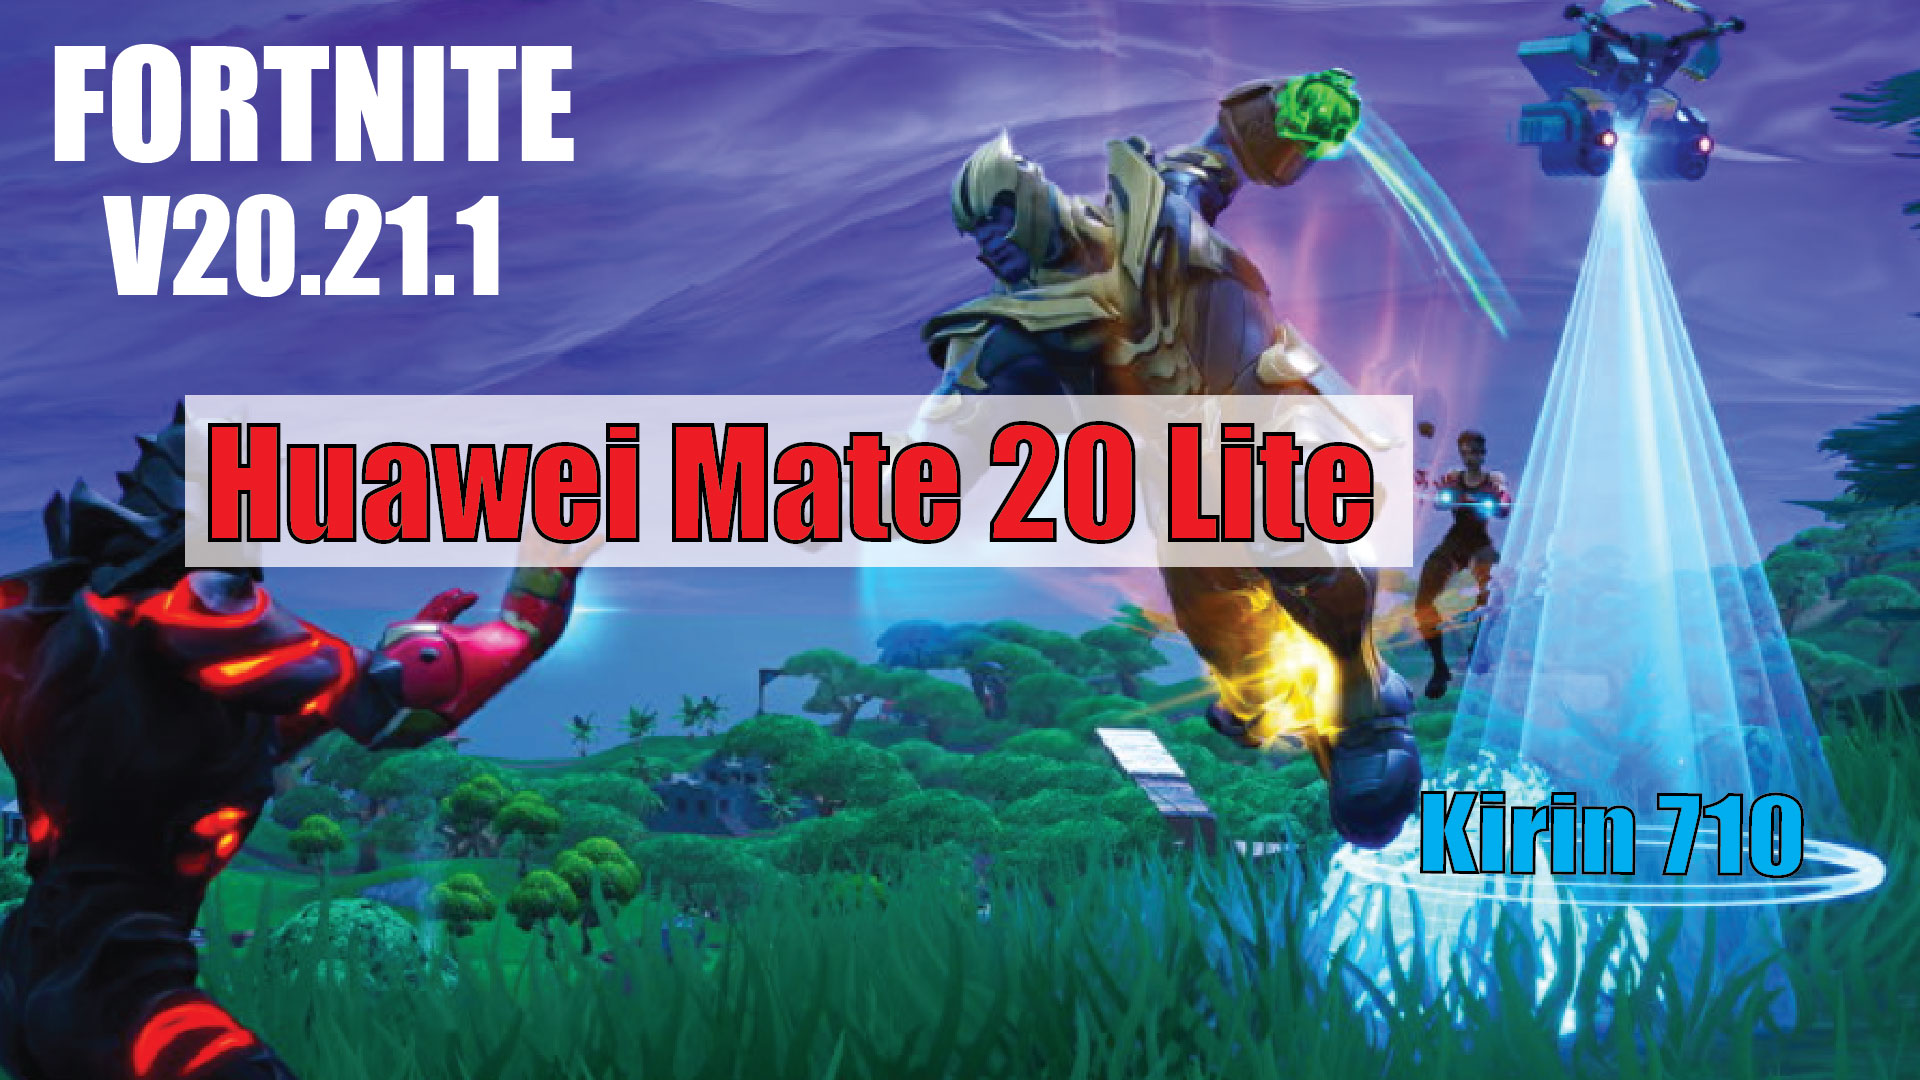 Geheugen linnen Kantine How To Install Fortnite Apk Fix Device Not Supported For Huawei Mate 20 Lite  - GSM FULL INFO %